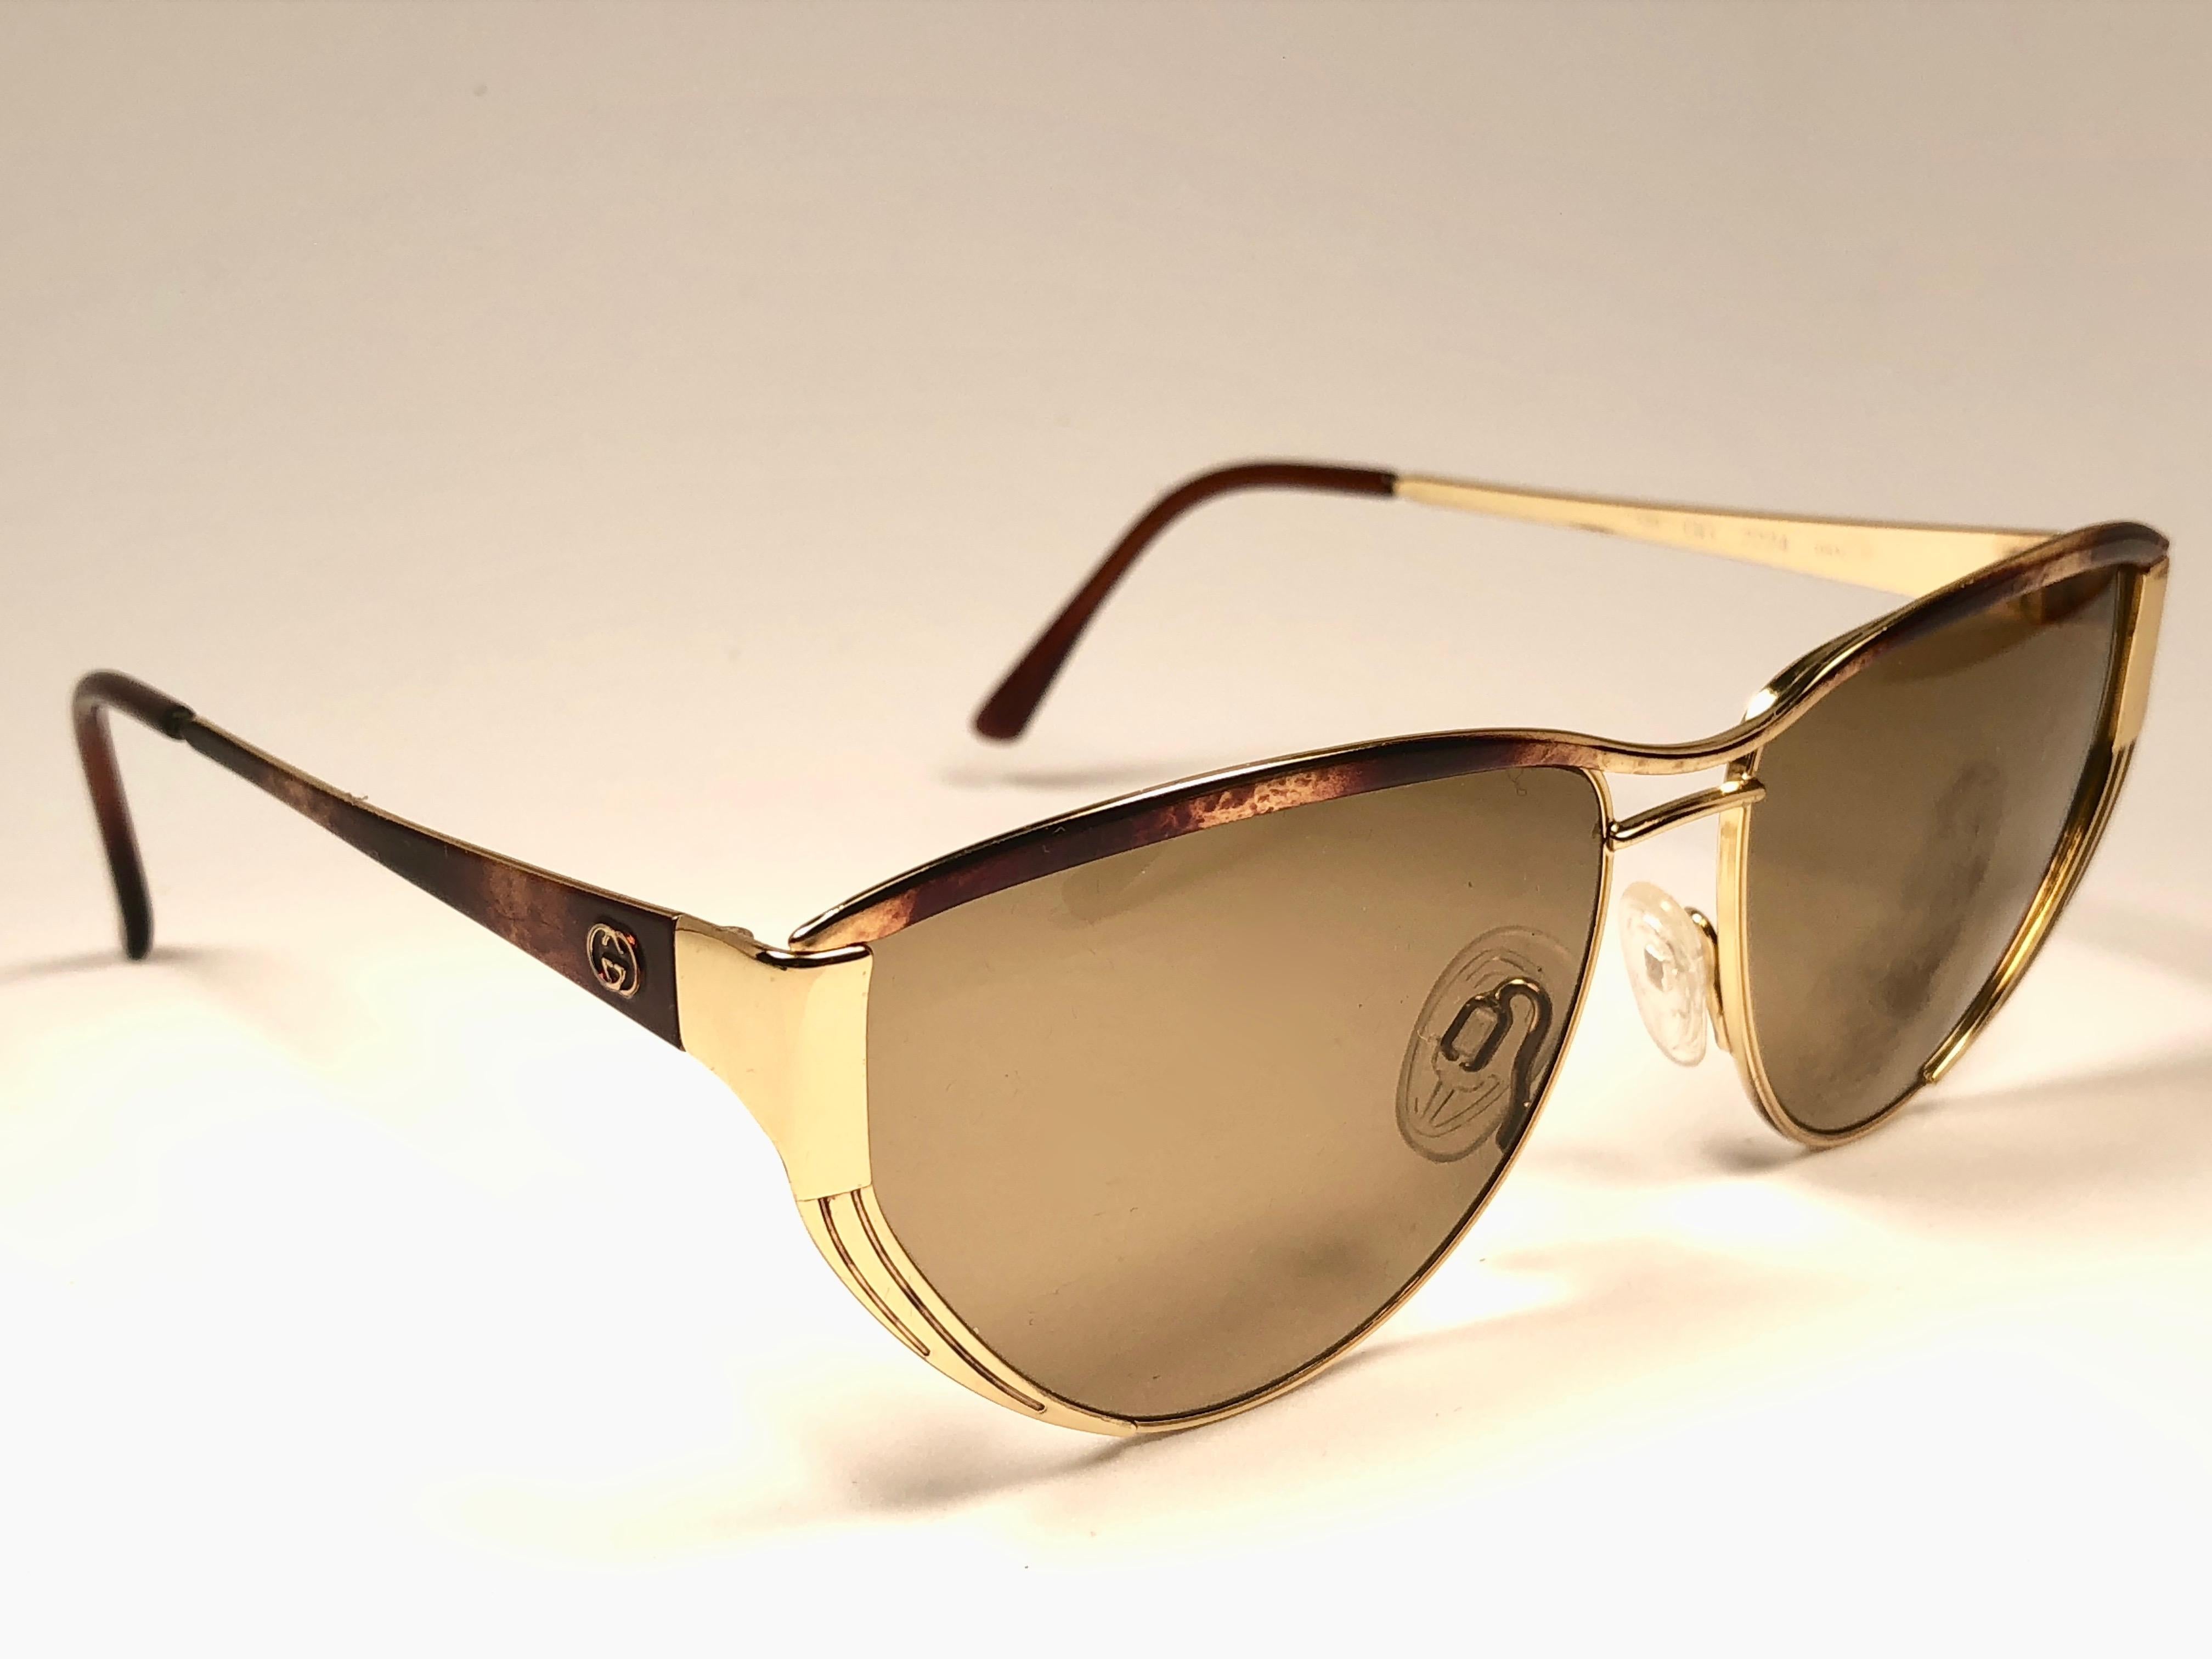 New Vintage Gucci gold and tortoise details frame. 
Spotless lenses.  
New never worn or displayed. This item could show minor sign of wear due to nearly 30 years of storage. Made in Italy.